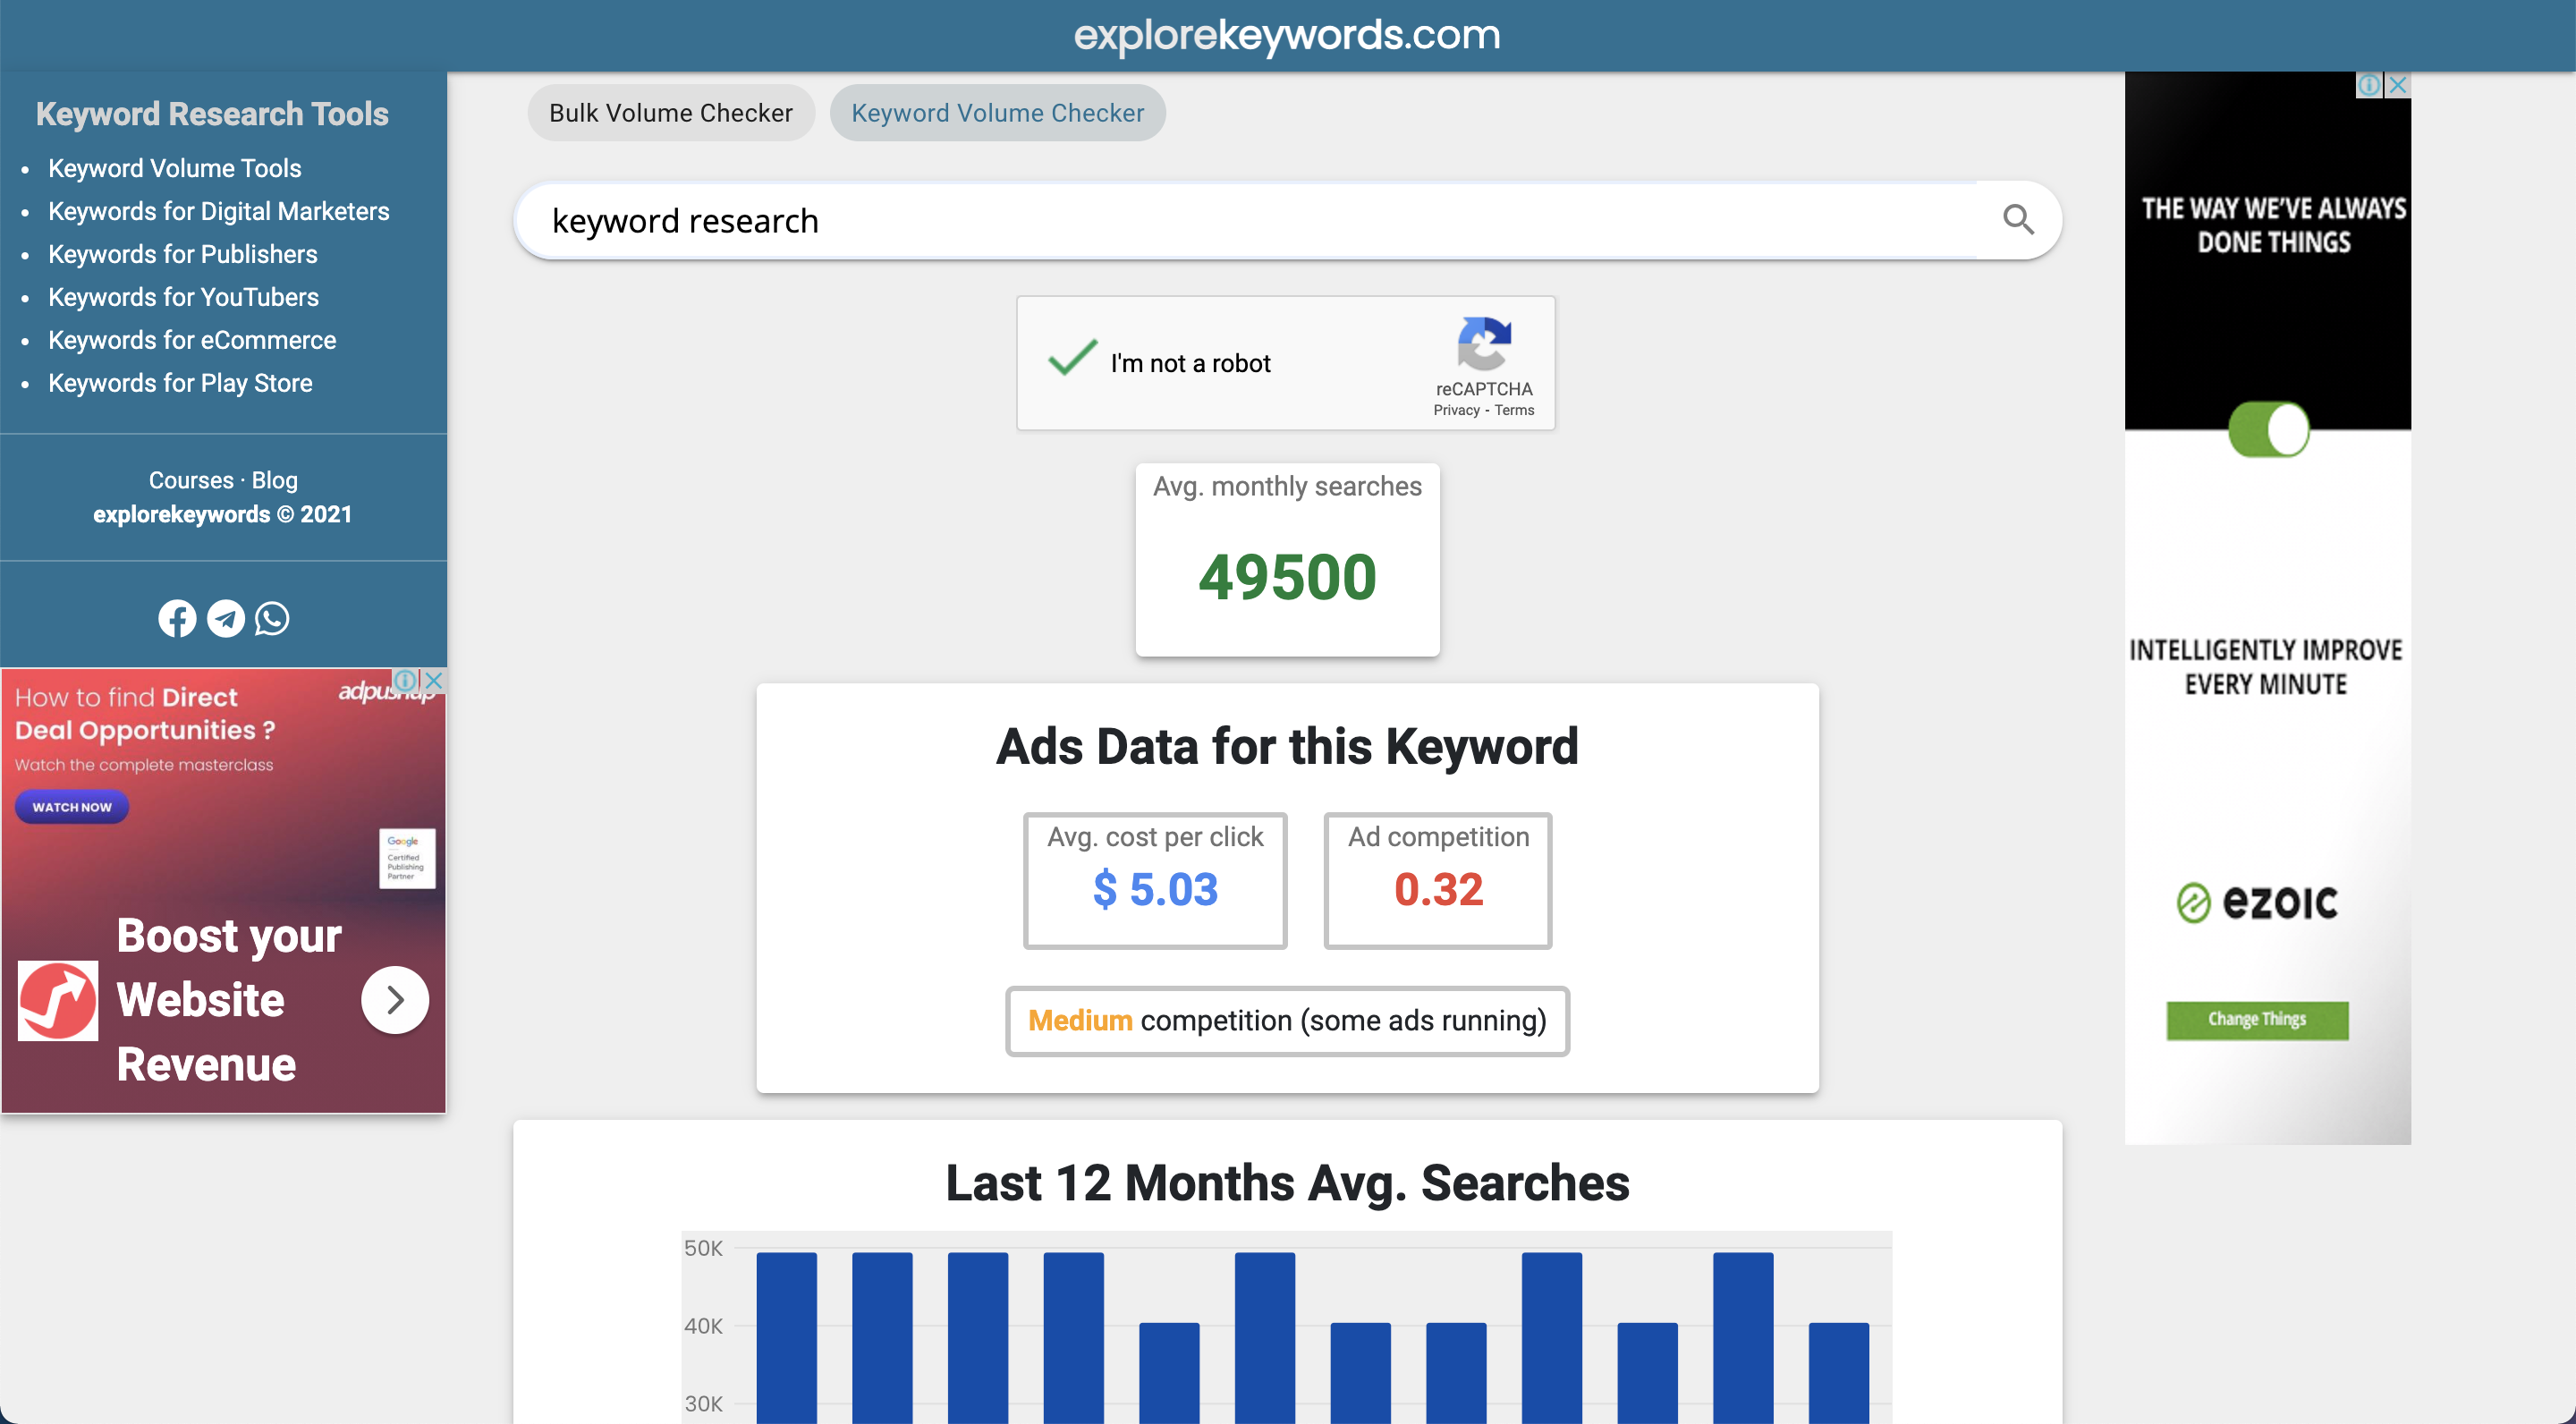 Find detailed information about Explore Keywords